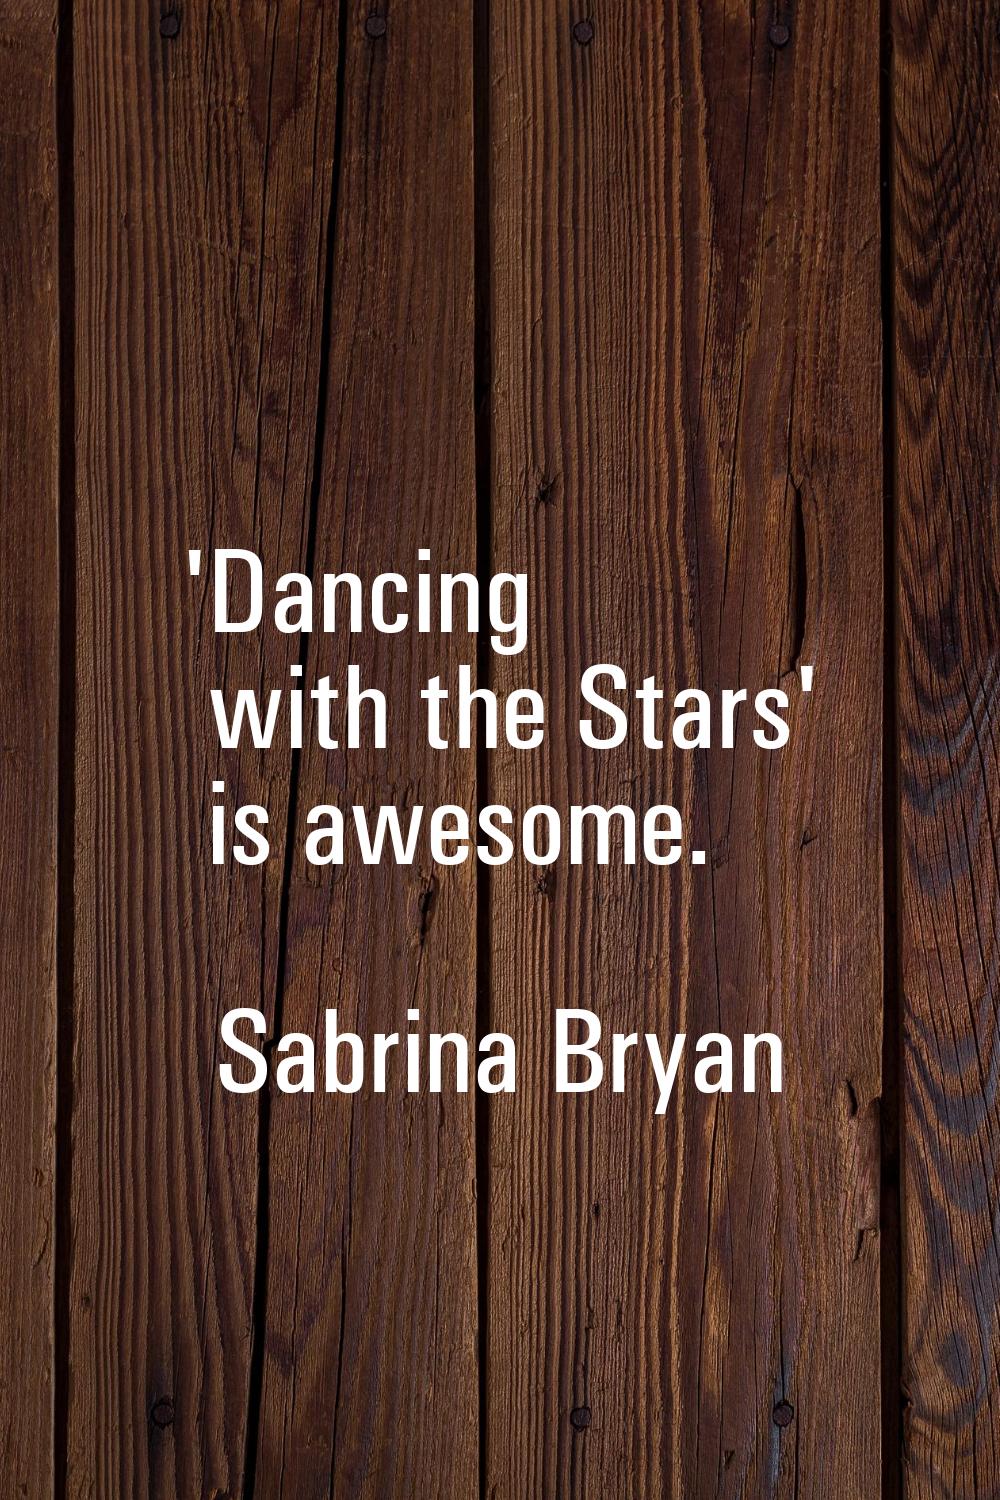 'Dancing with the Stars' is awesome.